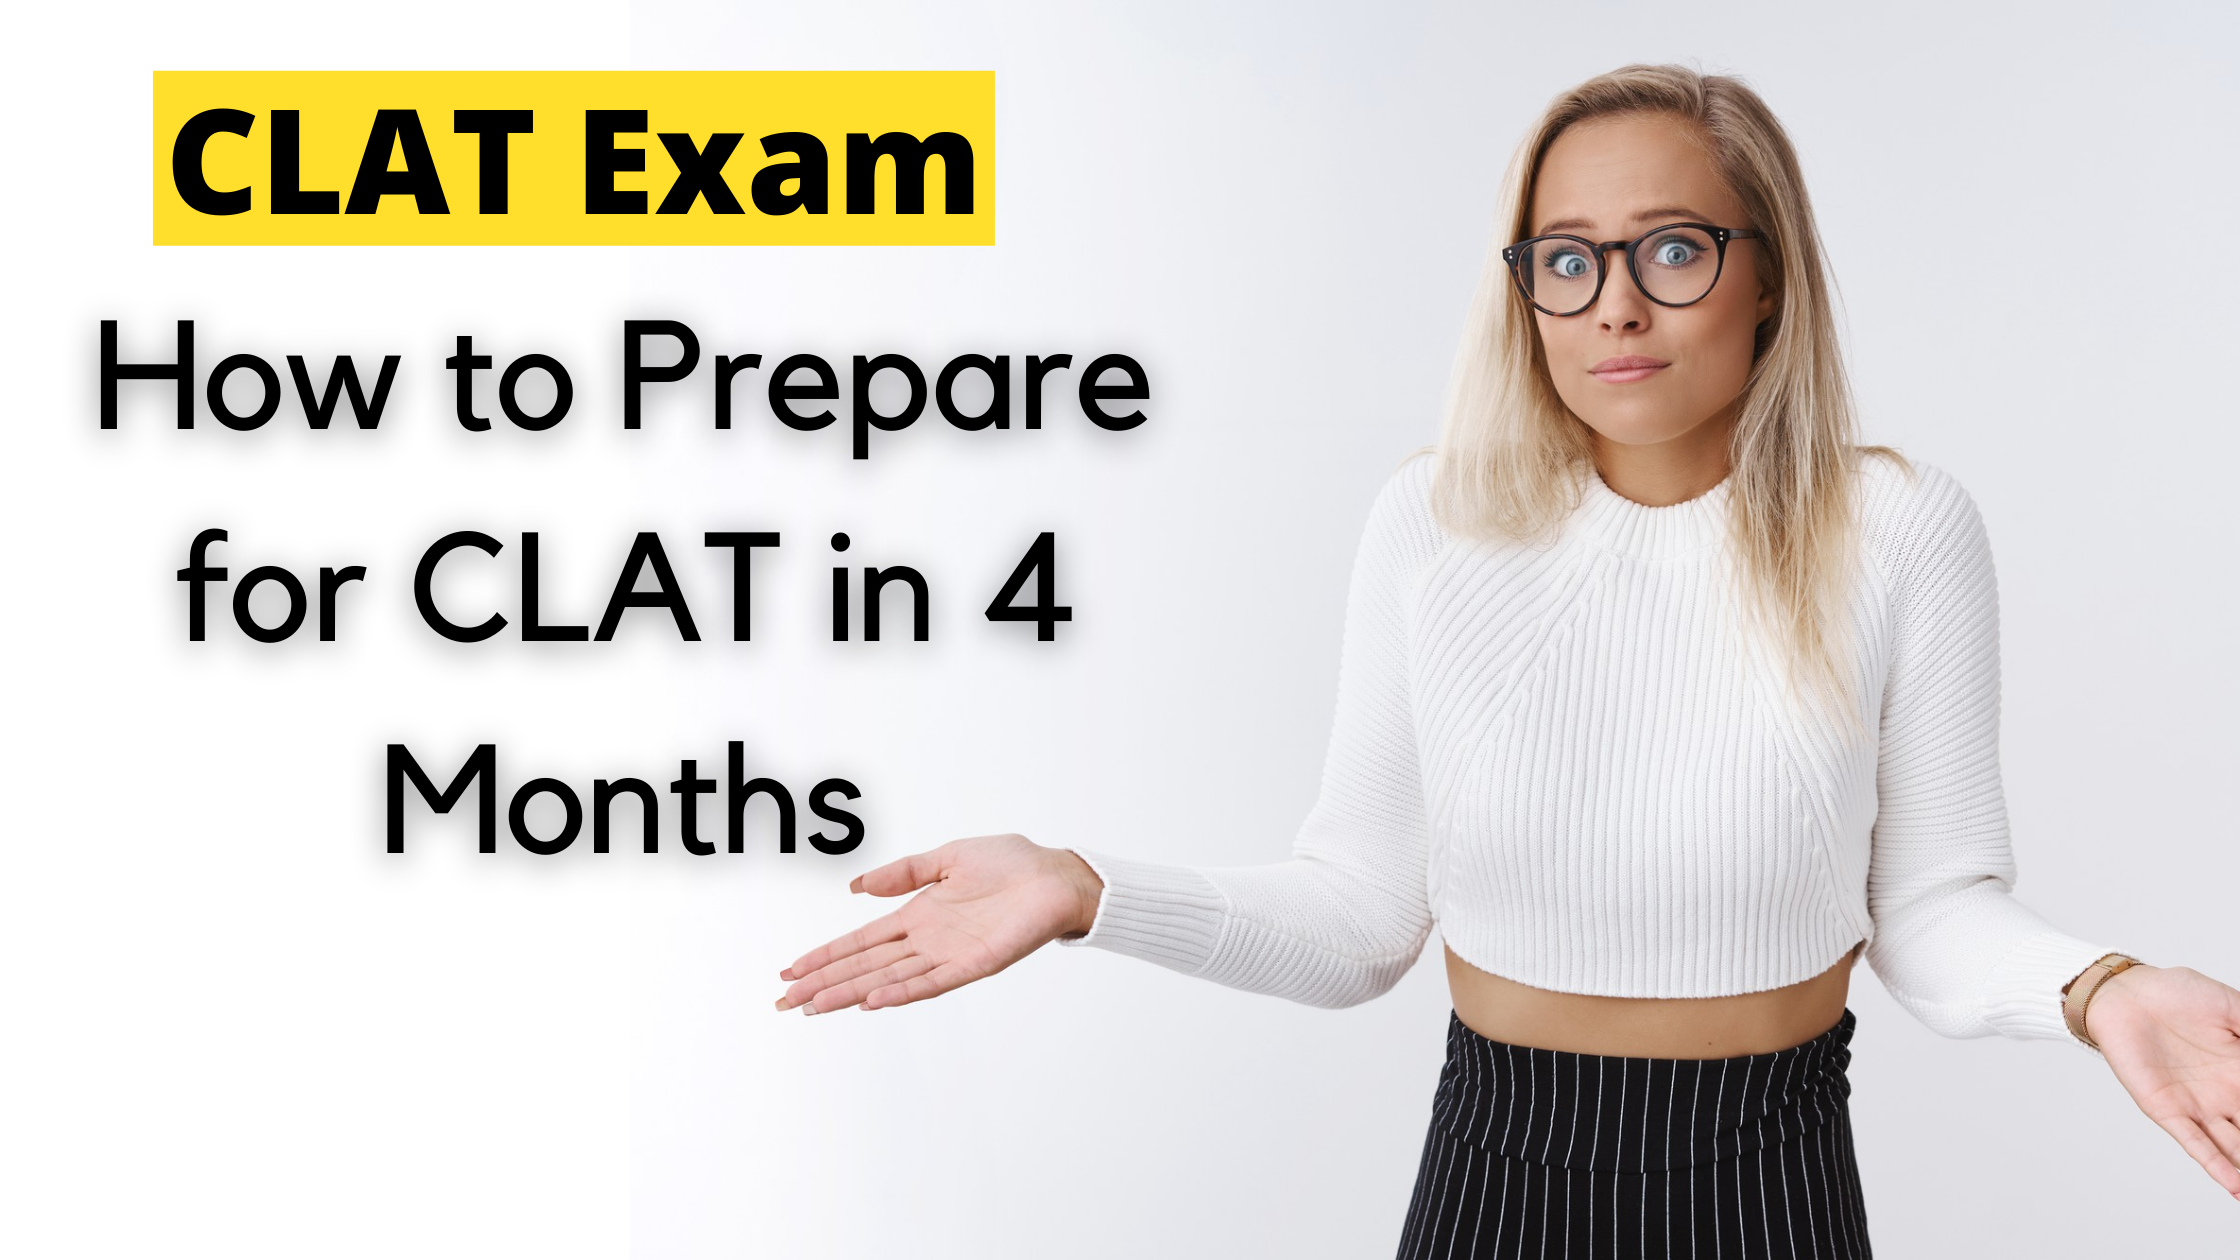 How to Prepare for CLAT in the Last 4 Months